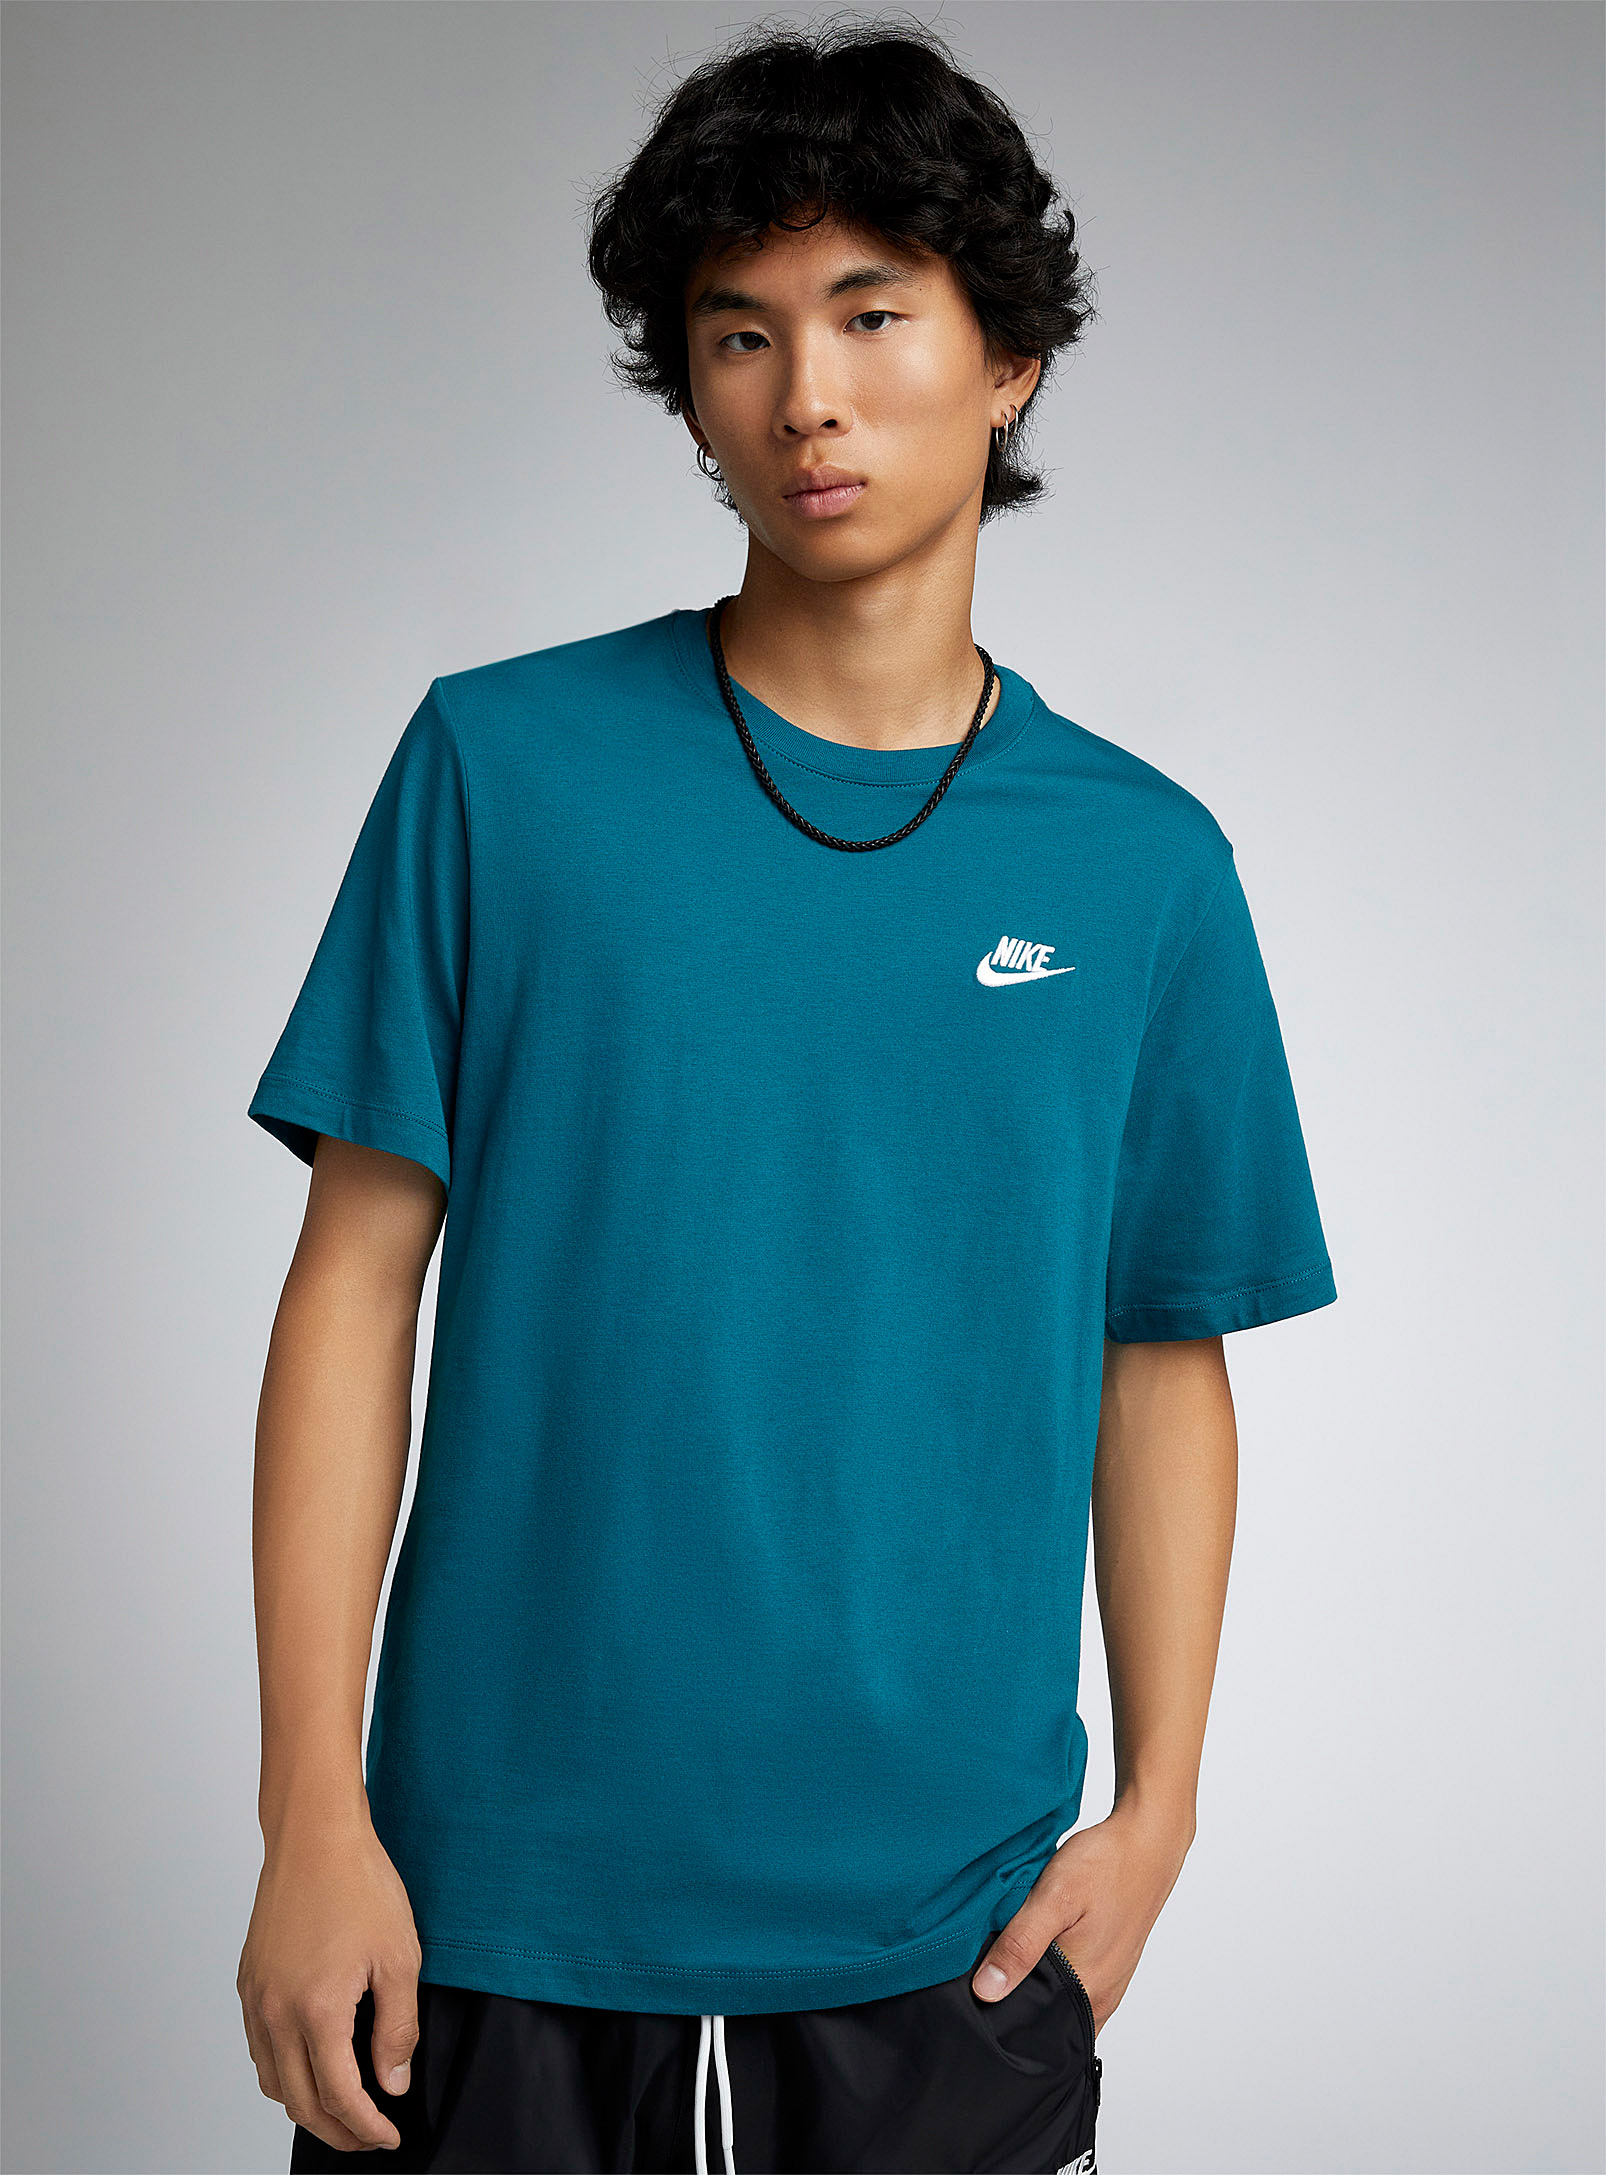 NIKE SMALL EMBROIDERED LOGO T-SHIRT